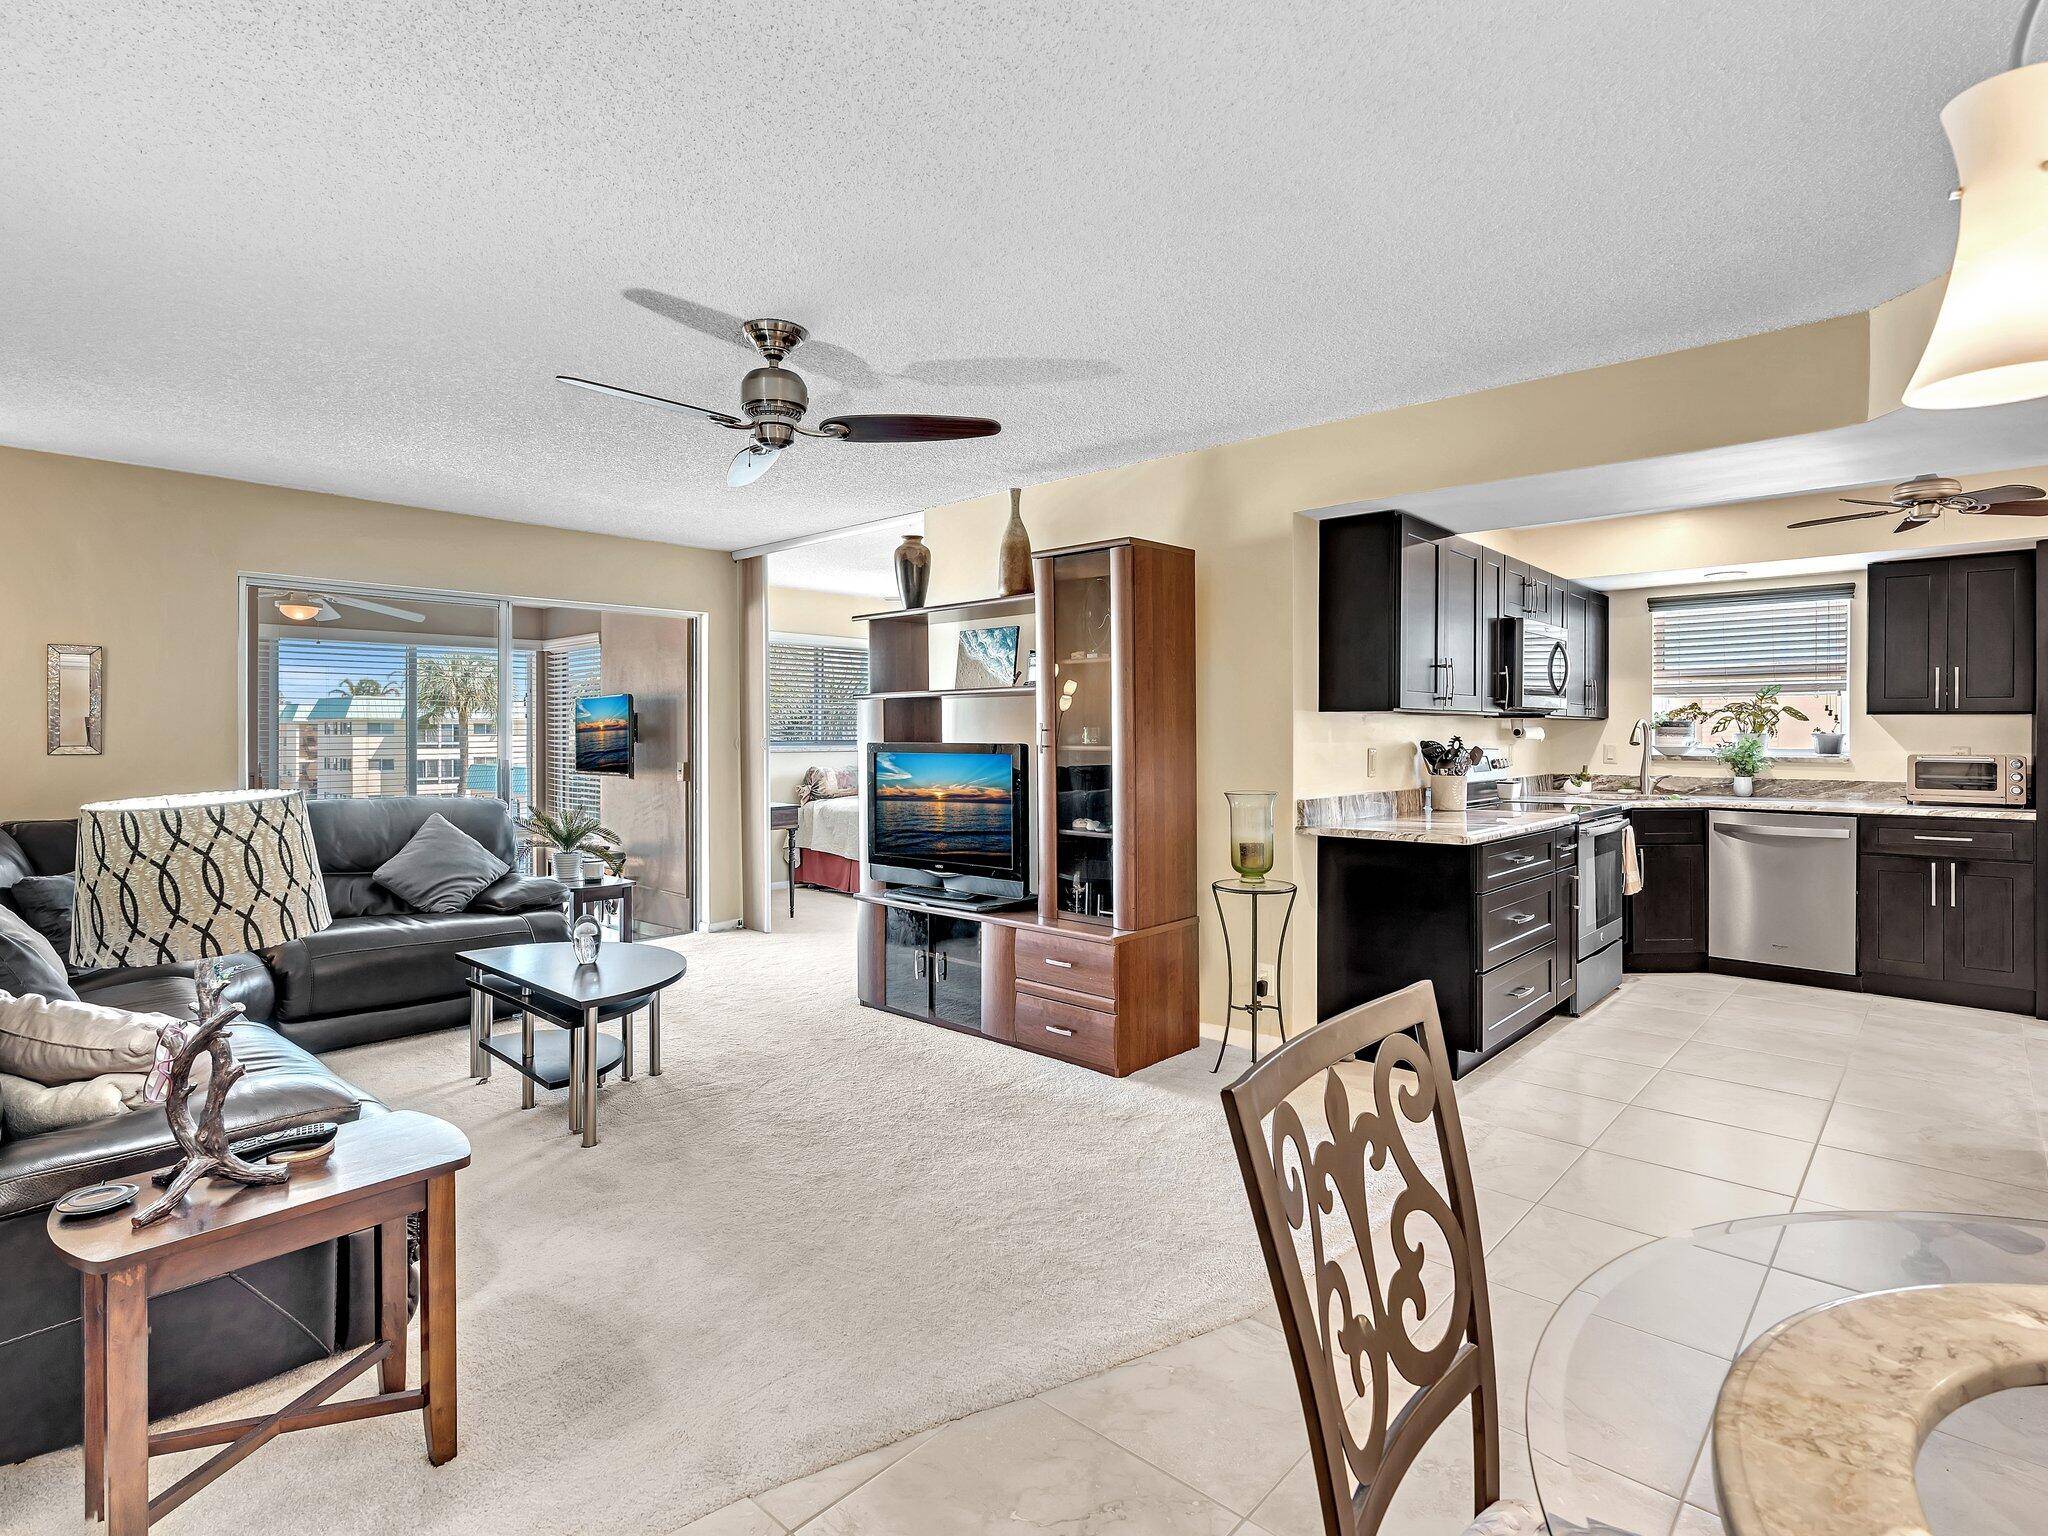 Nestled within Boynton Beach's vibrant 55 community, this exquisite 2 bed, 2 bath corner unit is a testament to meticulous care and timeless elegance.